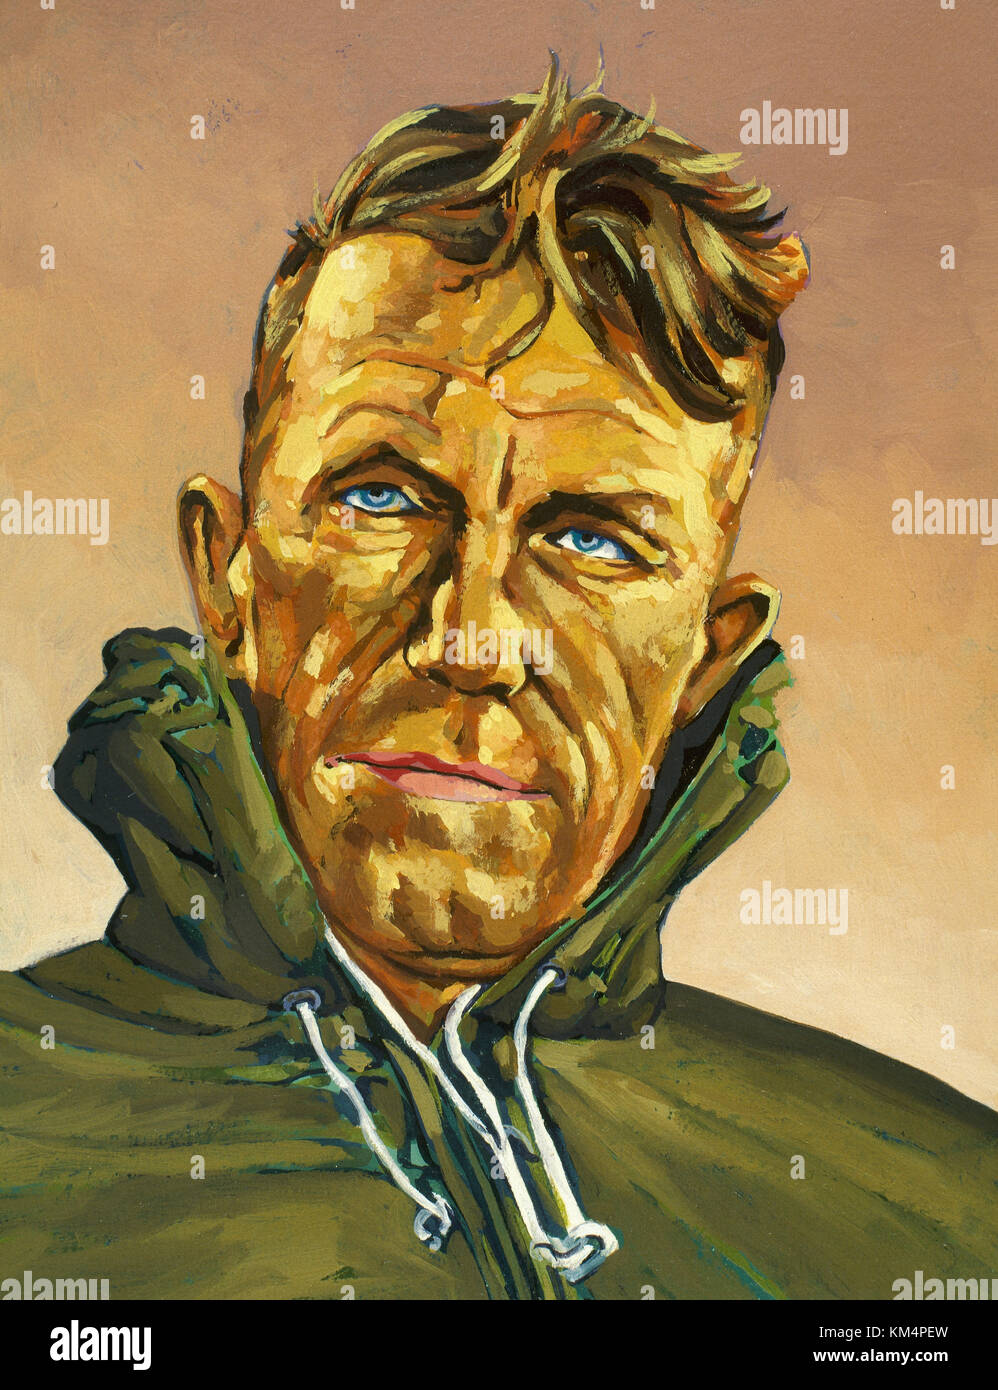 Sir Edmund Hillary (1919-2008). New Zealand mountaineer, explorer and philanthropist. On May 29, 1953, in an Anglo-Zeeland expedition, reached the summit of Mount Everest, the highest in the world. On January 4, 1958, as part of a British expedition, he reached the South Pole. Portrait. Watercolor. Stock Photo